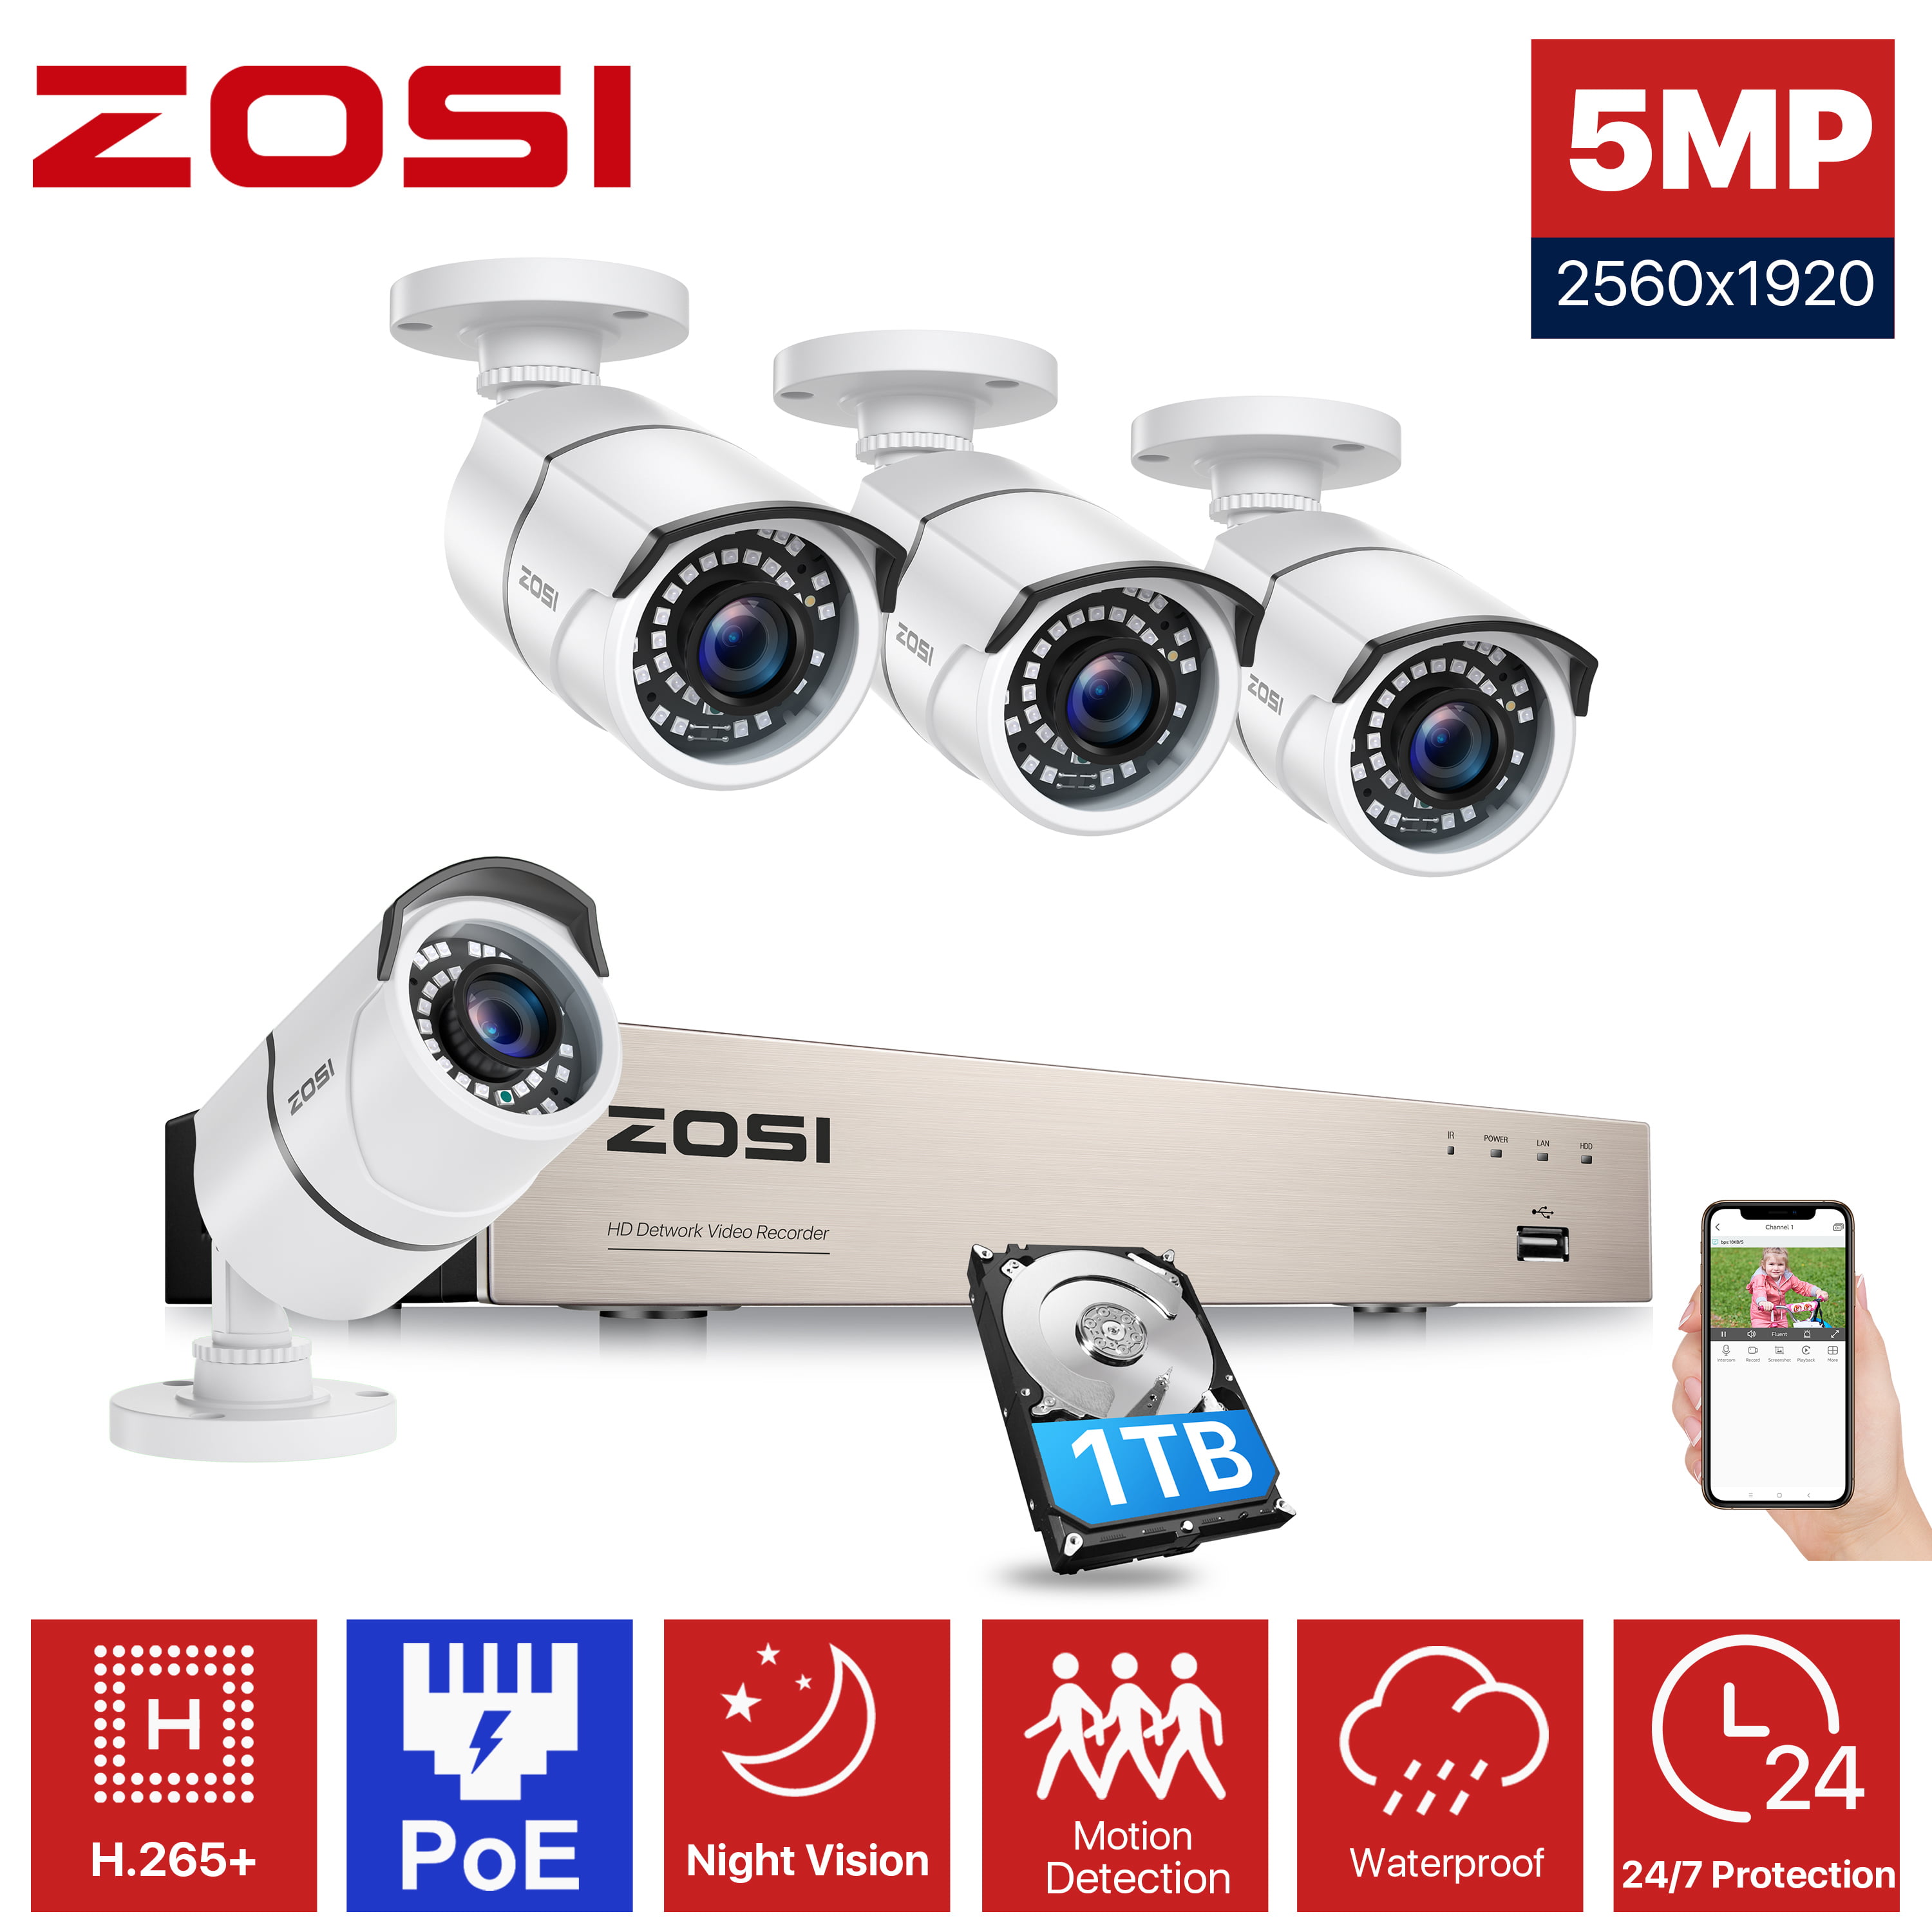 1TB Hard Drive Built-in ZOSI 1080p H.265 PoE Security Camera Systems Outdoor Indoor 5MP 8 Channel PoE NVR Recorder and 4 x 2MP Surveillance CCTV Bullet Dome IP Cameras with Long Night Vision 